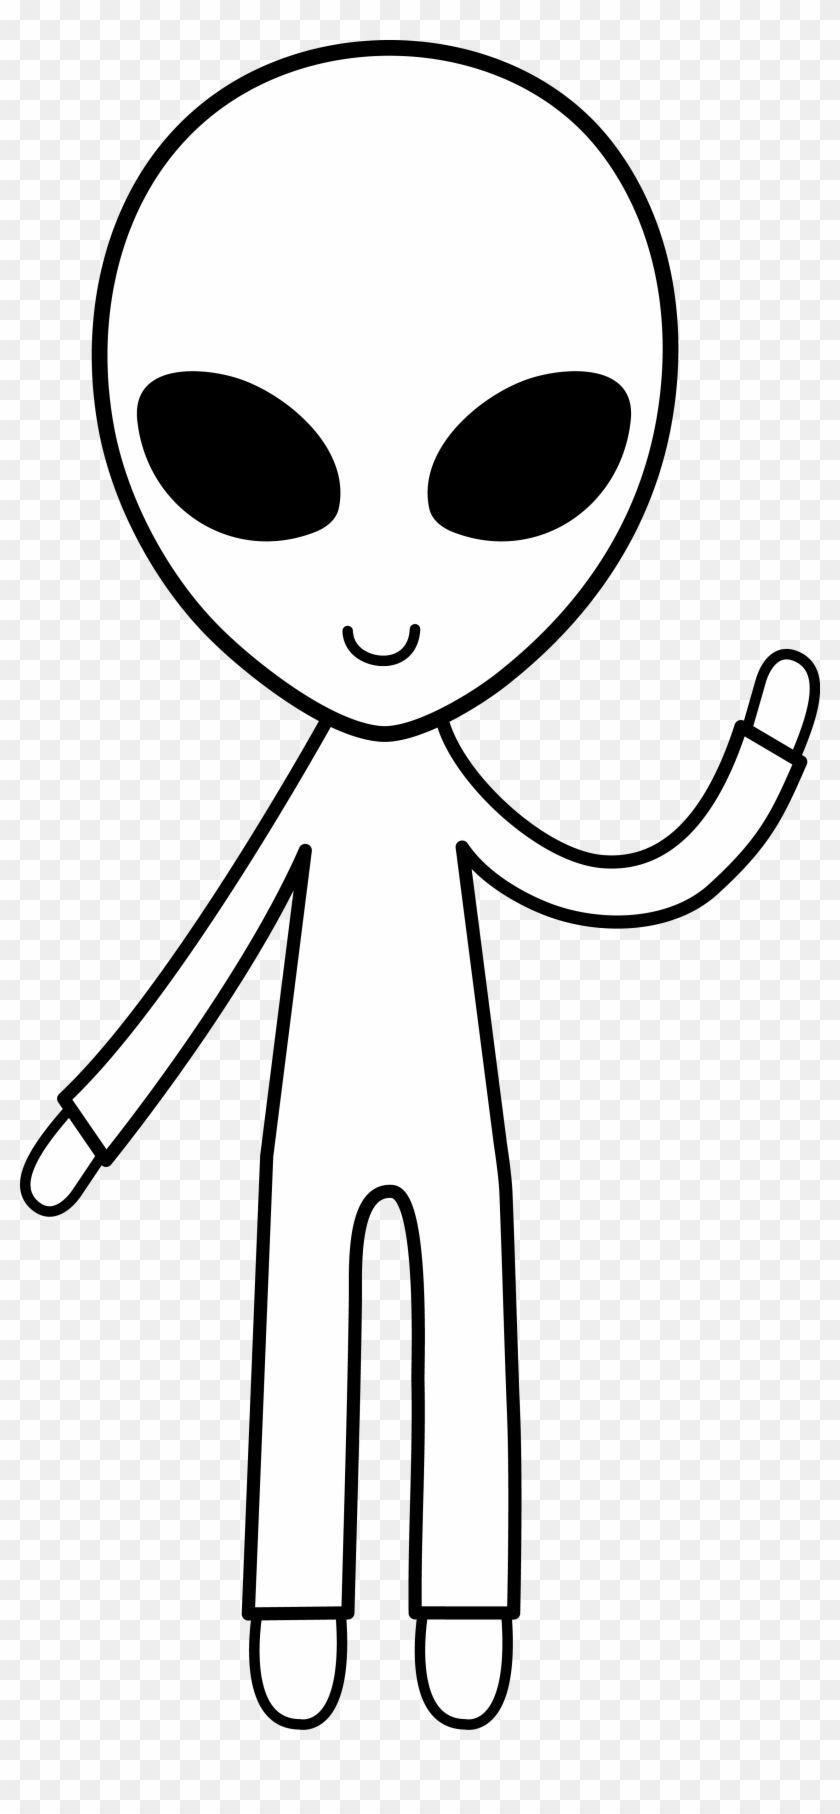 Black and White Alien Logo - Cartoon Alien Black And White - Free Transparent PNG Clipart Images ...